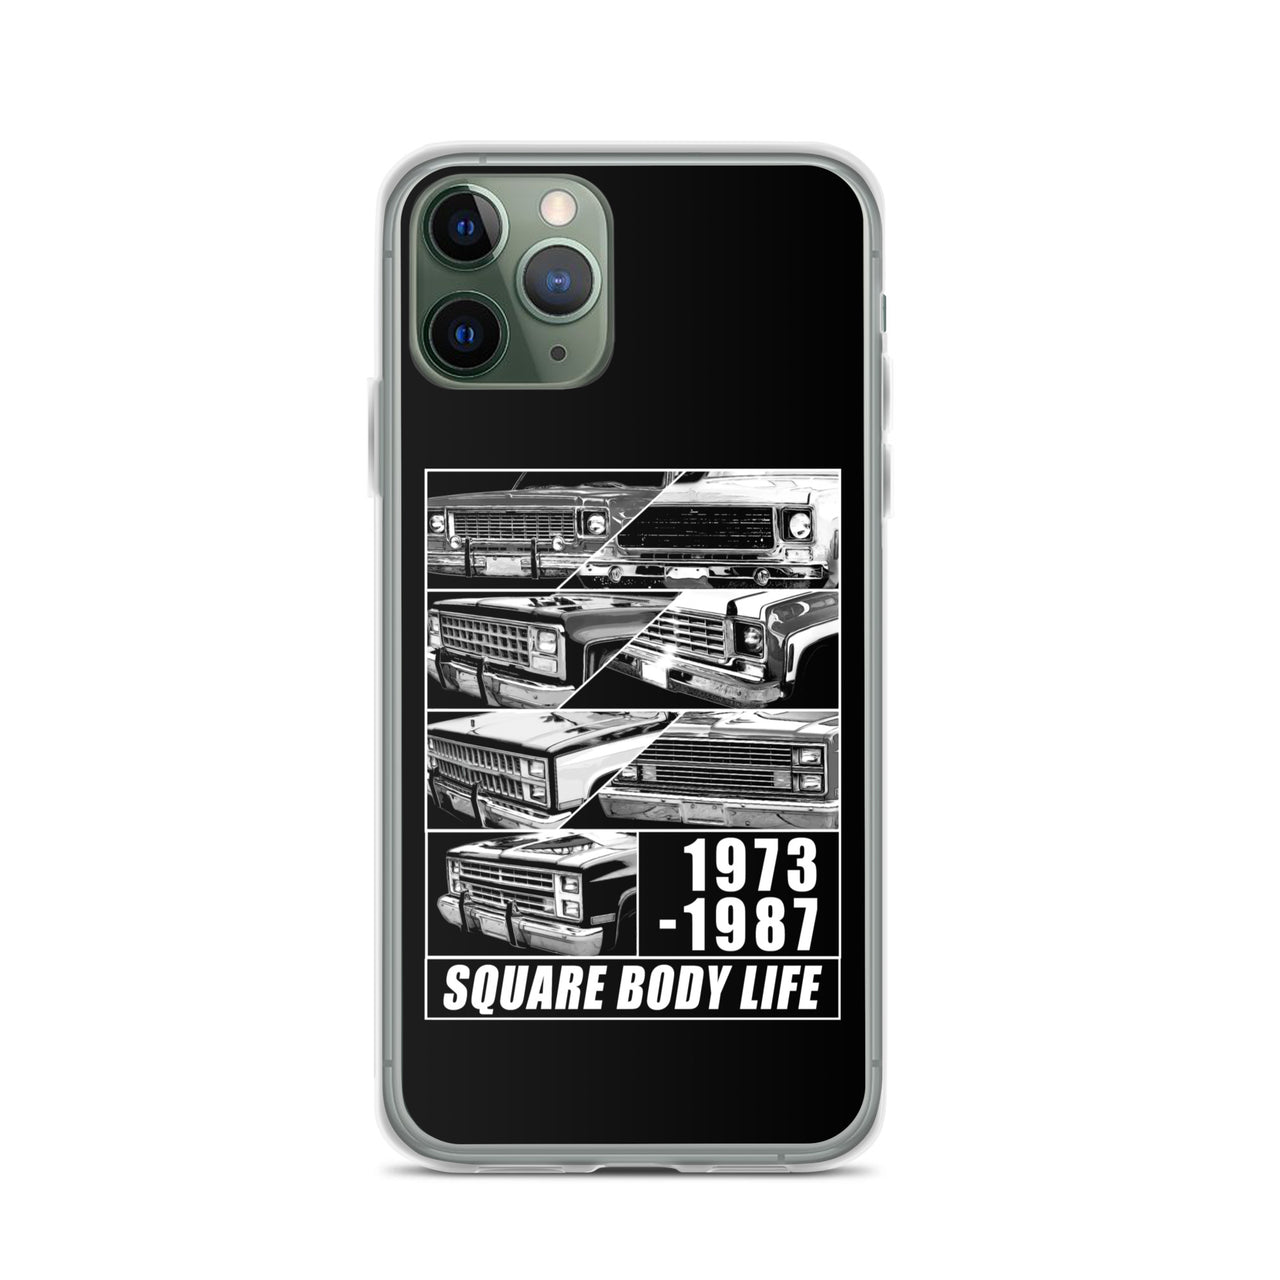 Square Body Truck Grilles Phone Case For iPhone 11 pro 